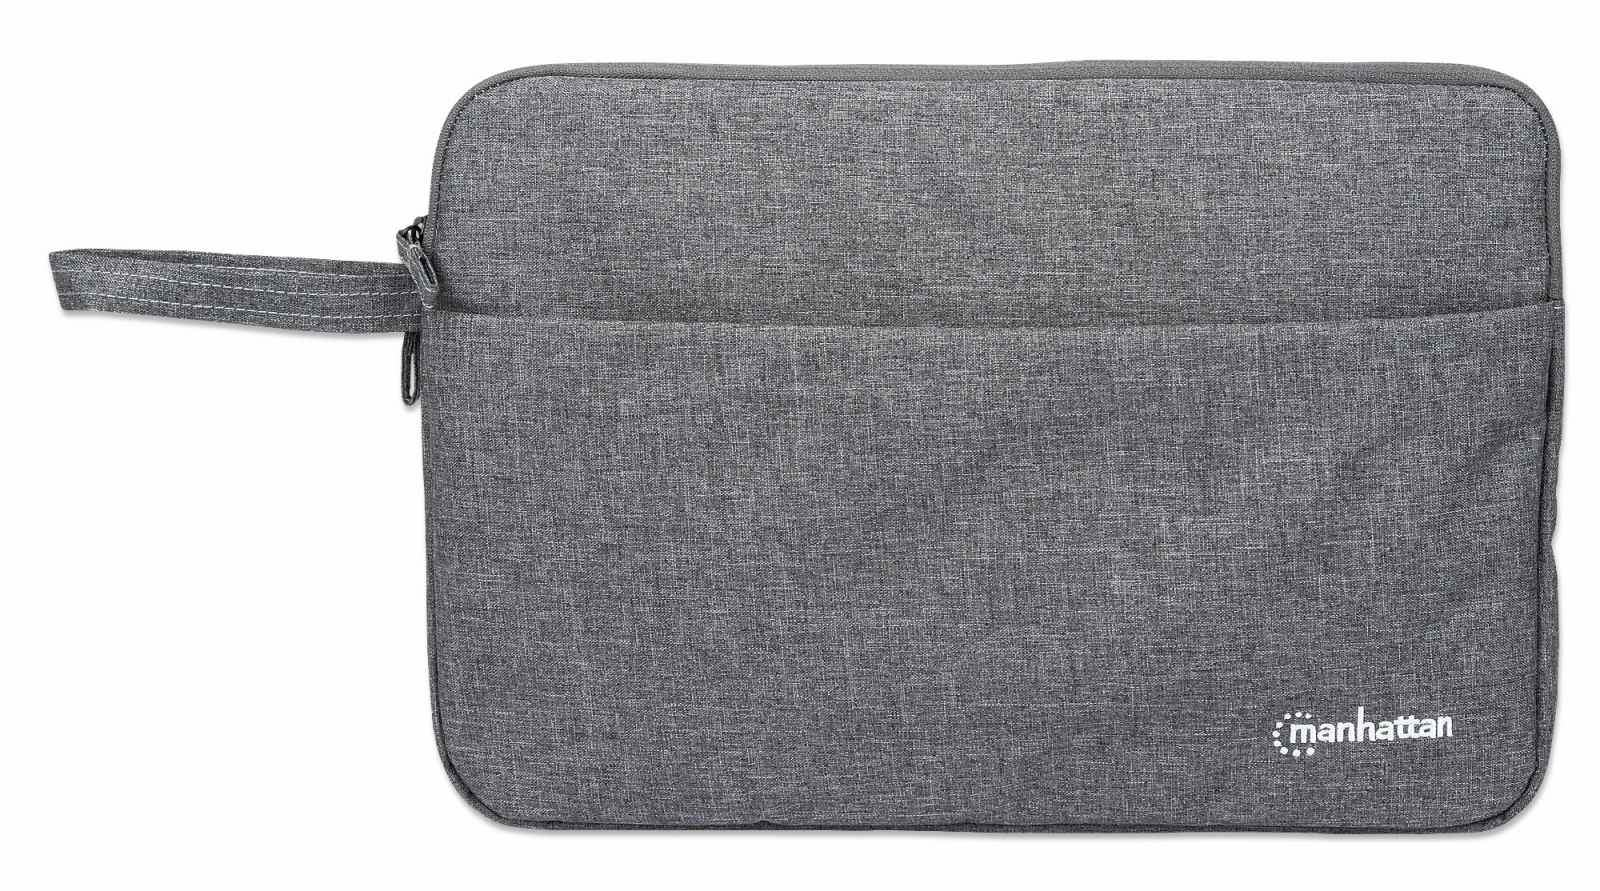 Manhattan Seattle Laptop Sleeve 14.5", Grey, Padded, Extra Soft Internal Cushioning, Main Compartment with double zips, Zippered Front Pocket, Carry Loop, Water Resistant and Durable